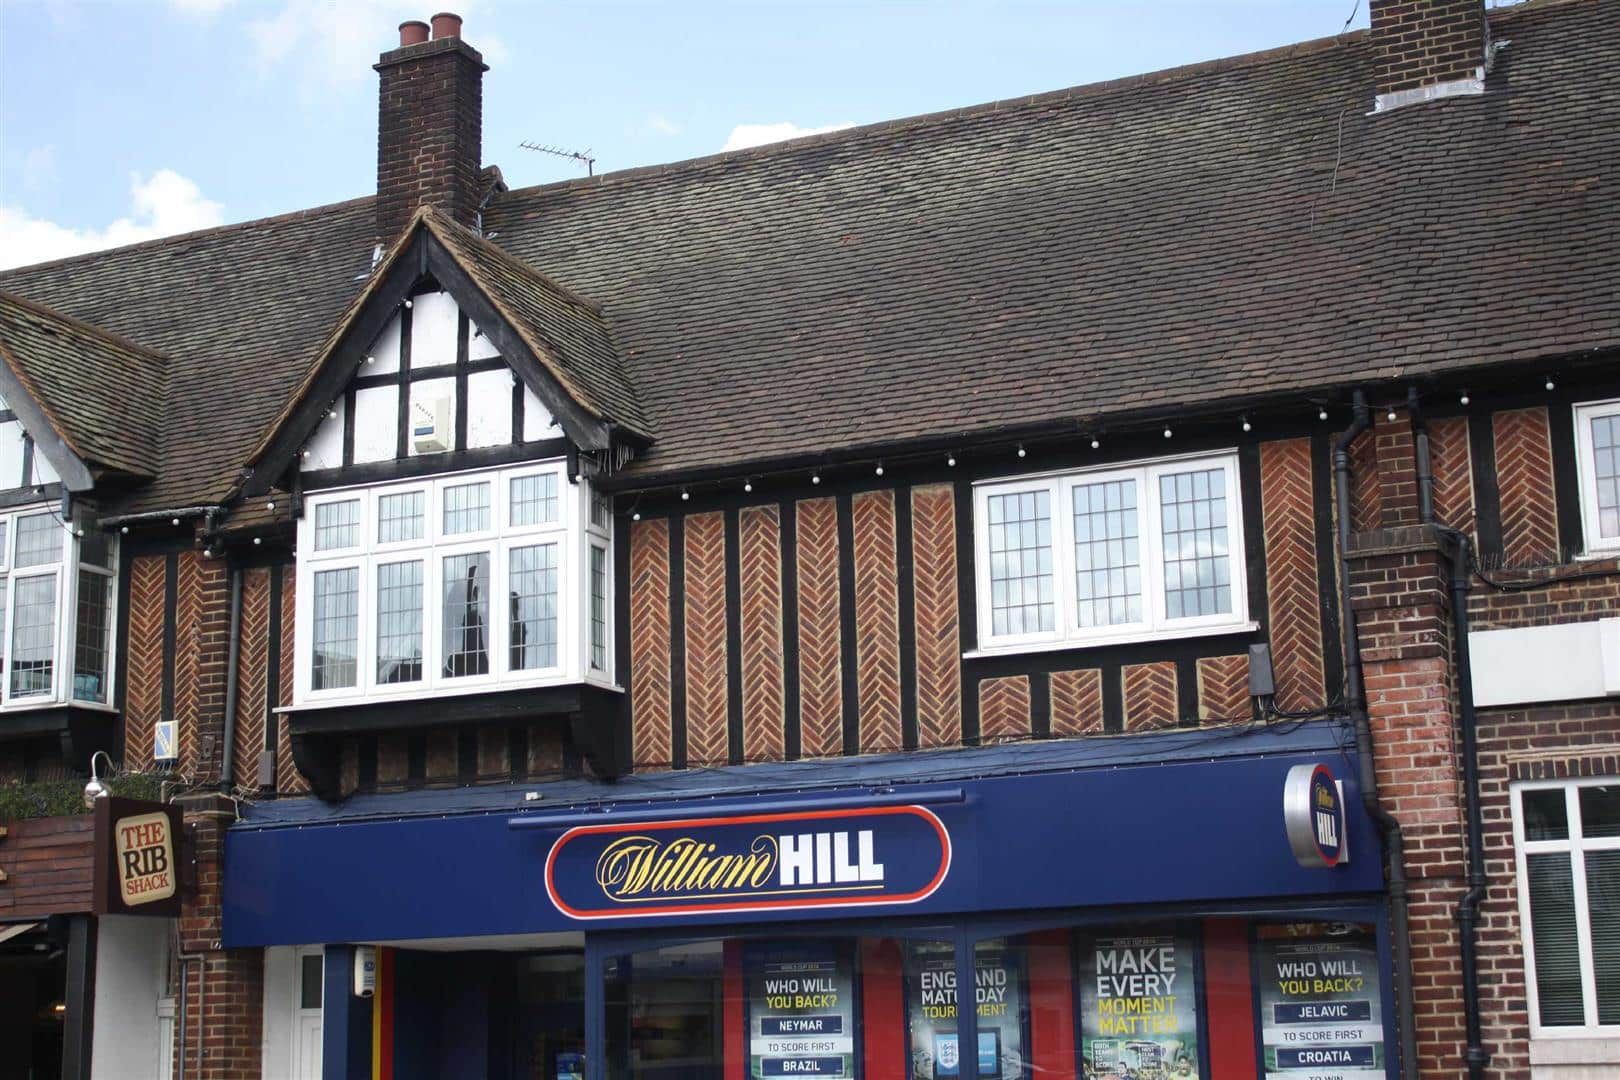 Station Square, Petts Wood, Kent, BR5 1LY